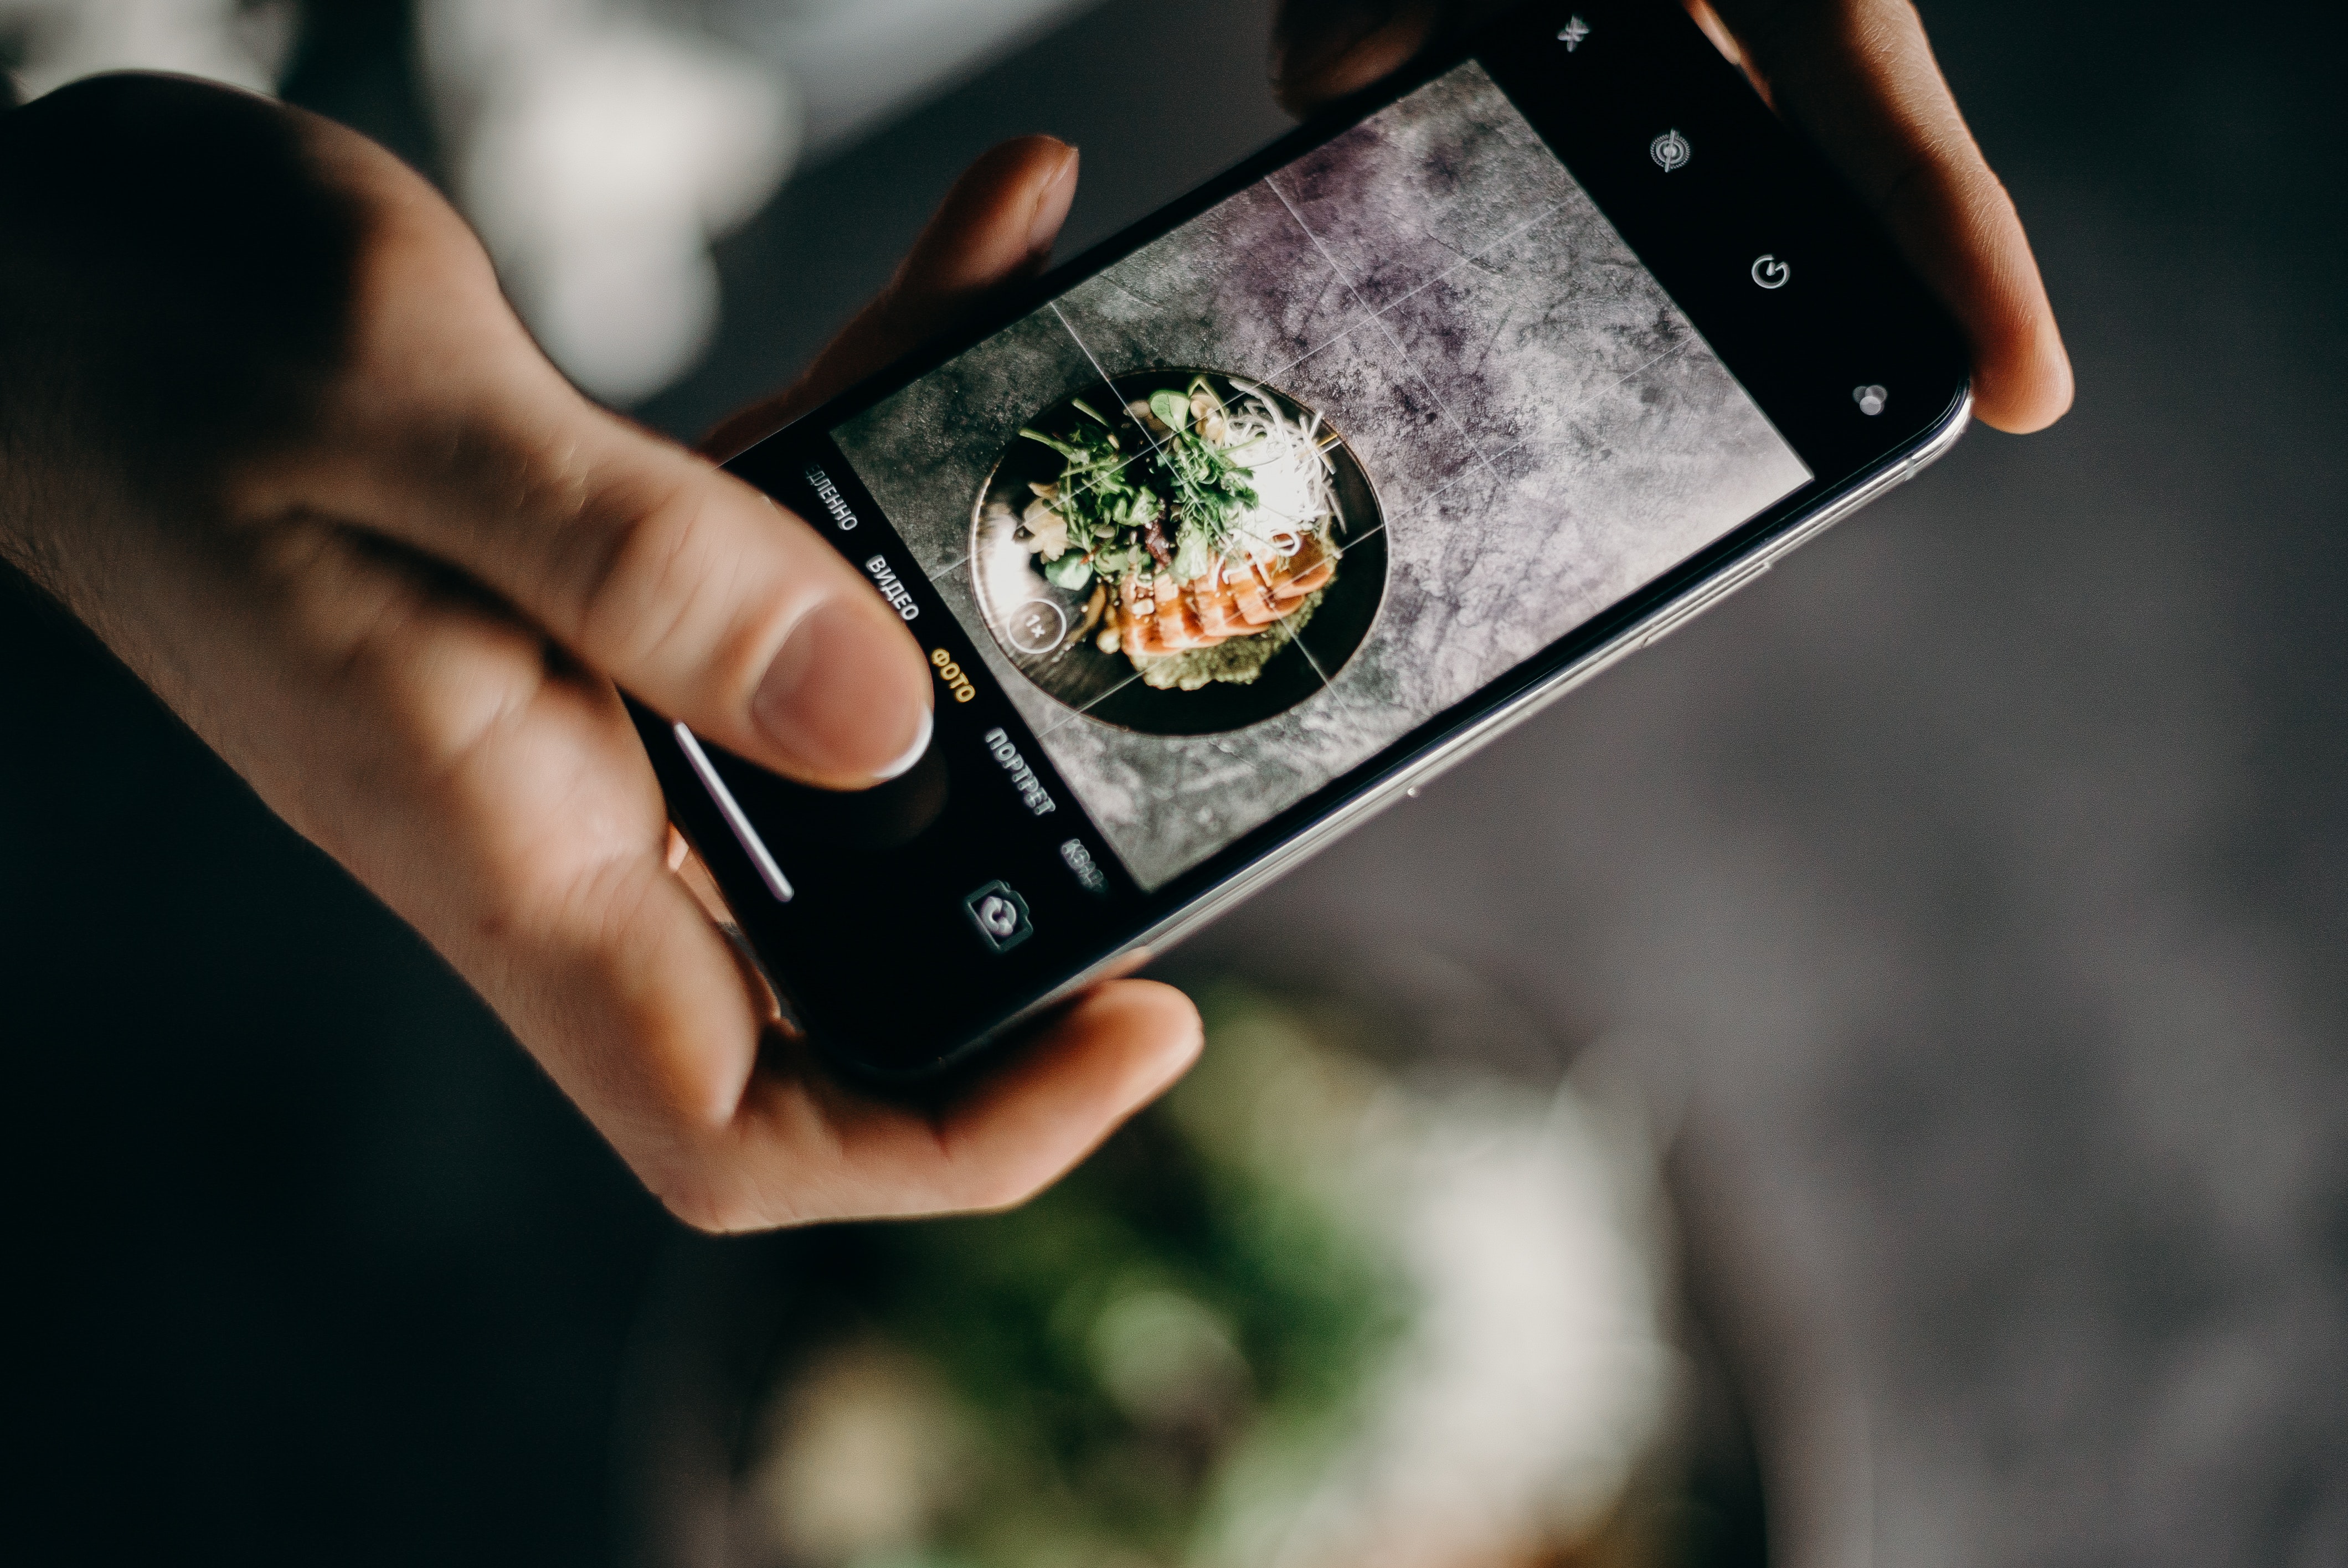 Someone taking a photo of a ramen dish using their phone